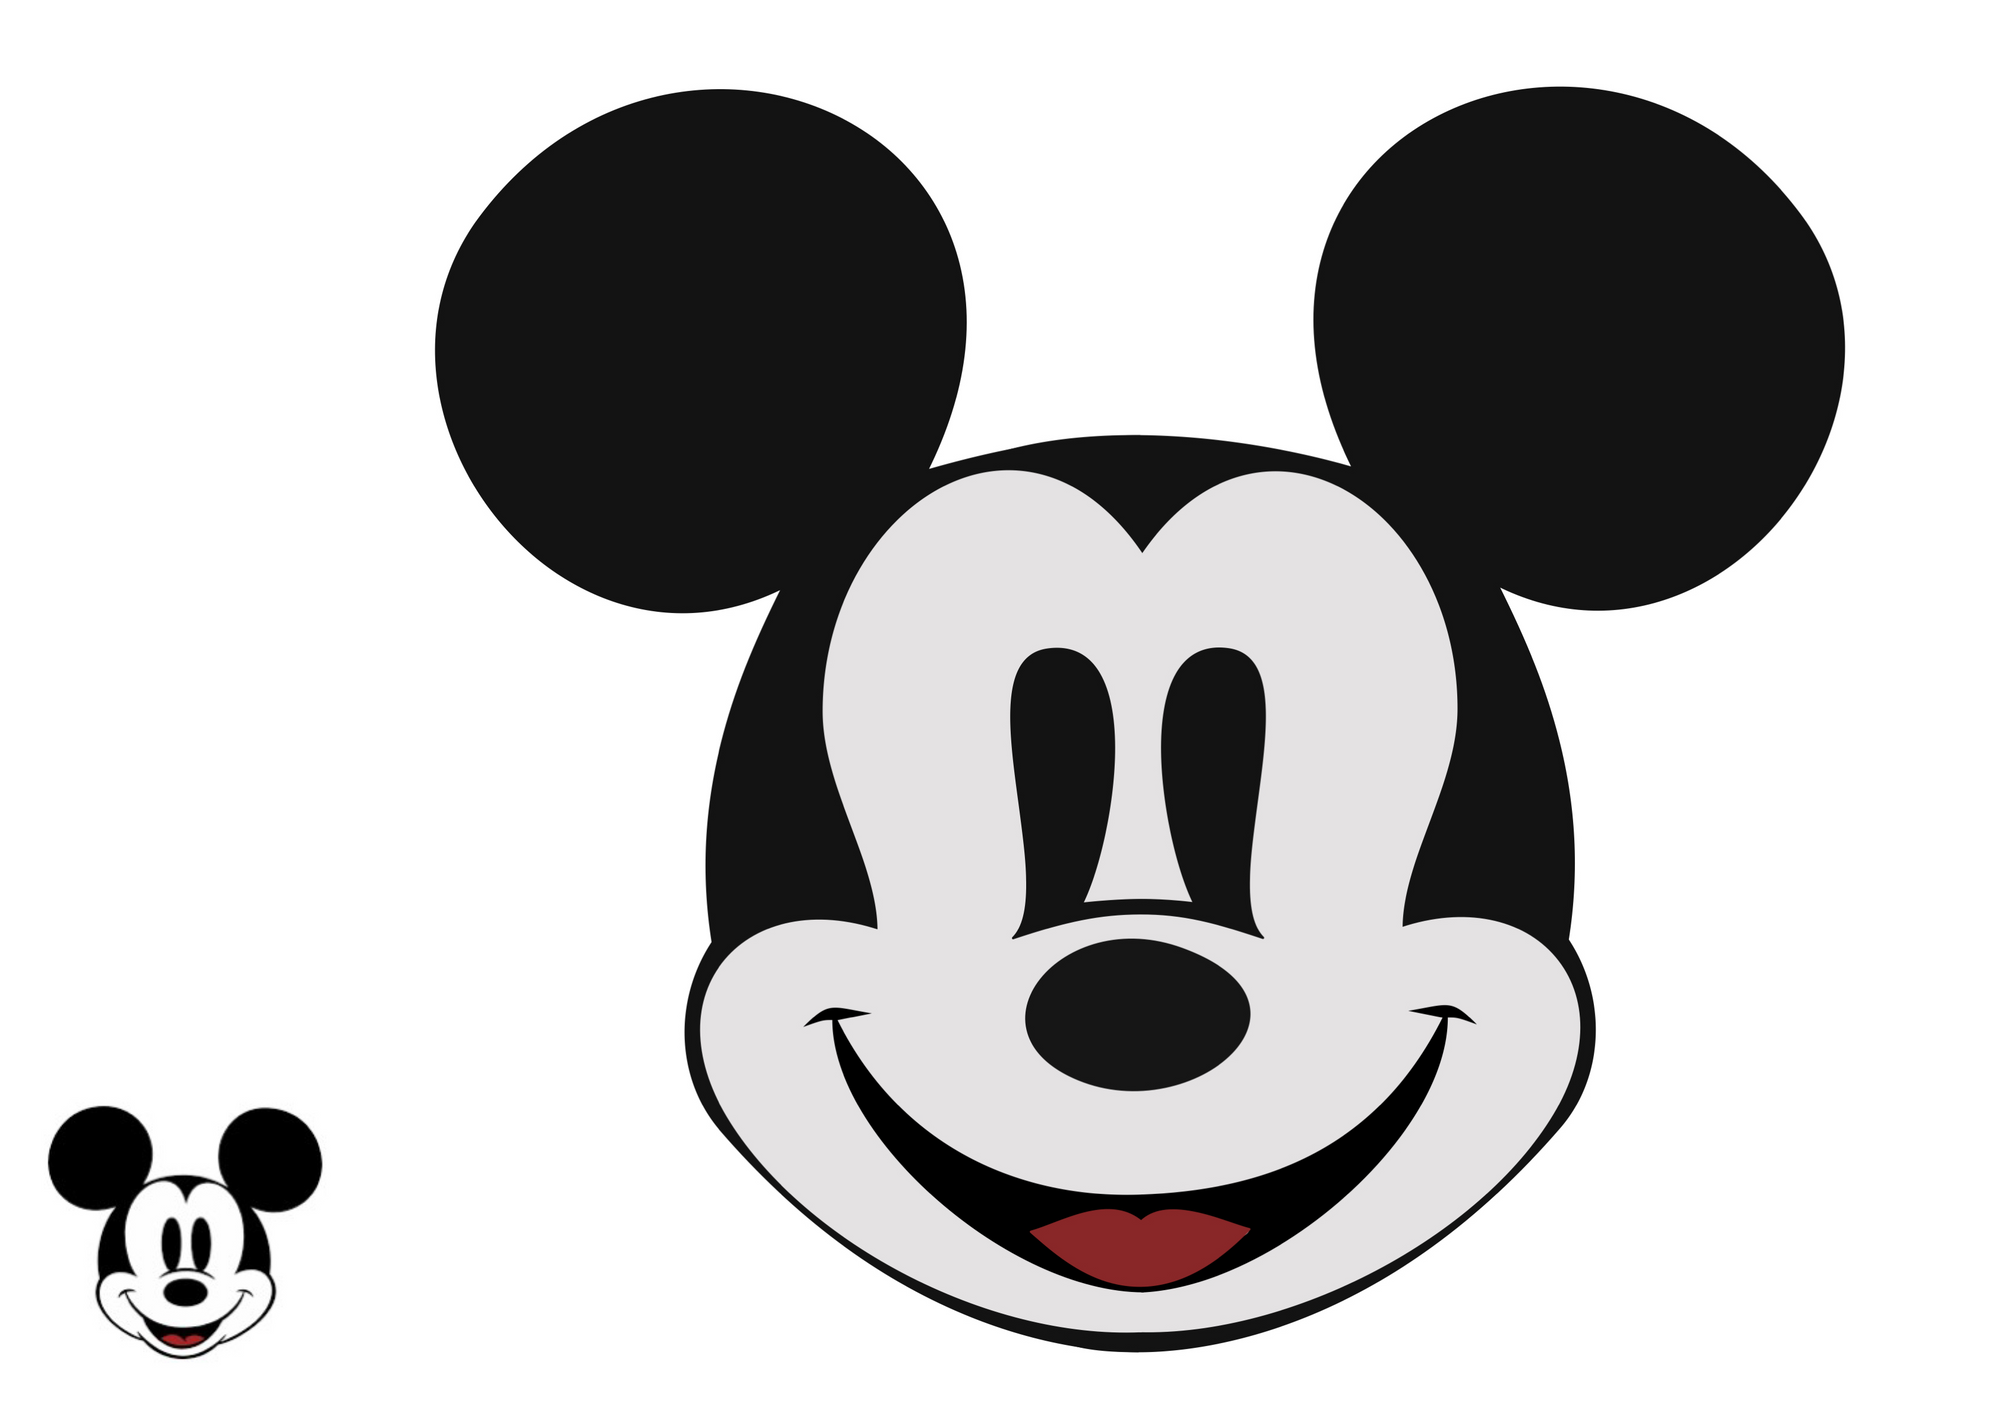 Two Mickey Mouse heads